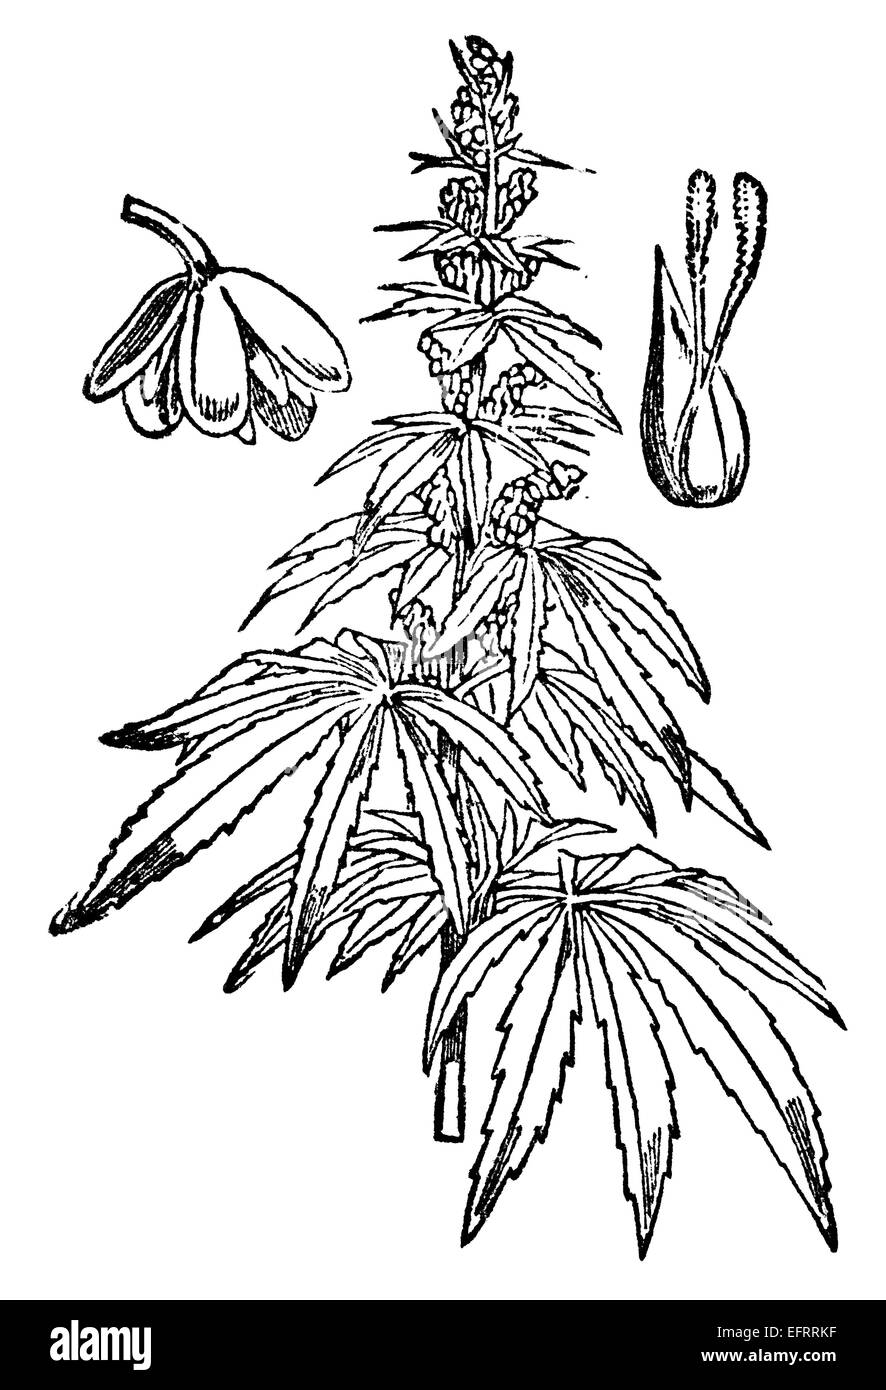 Victorian engraving of a hemp plant. Digitally restored image from a mid-19th century Encyclopaedia. Stock Photo